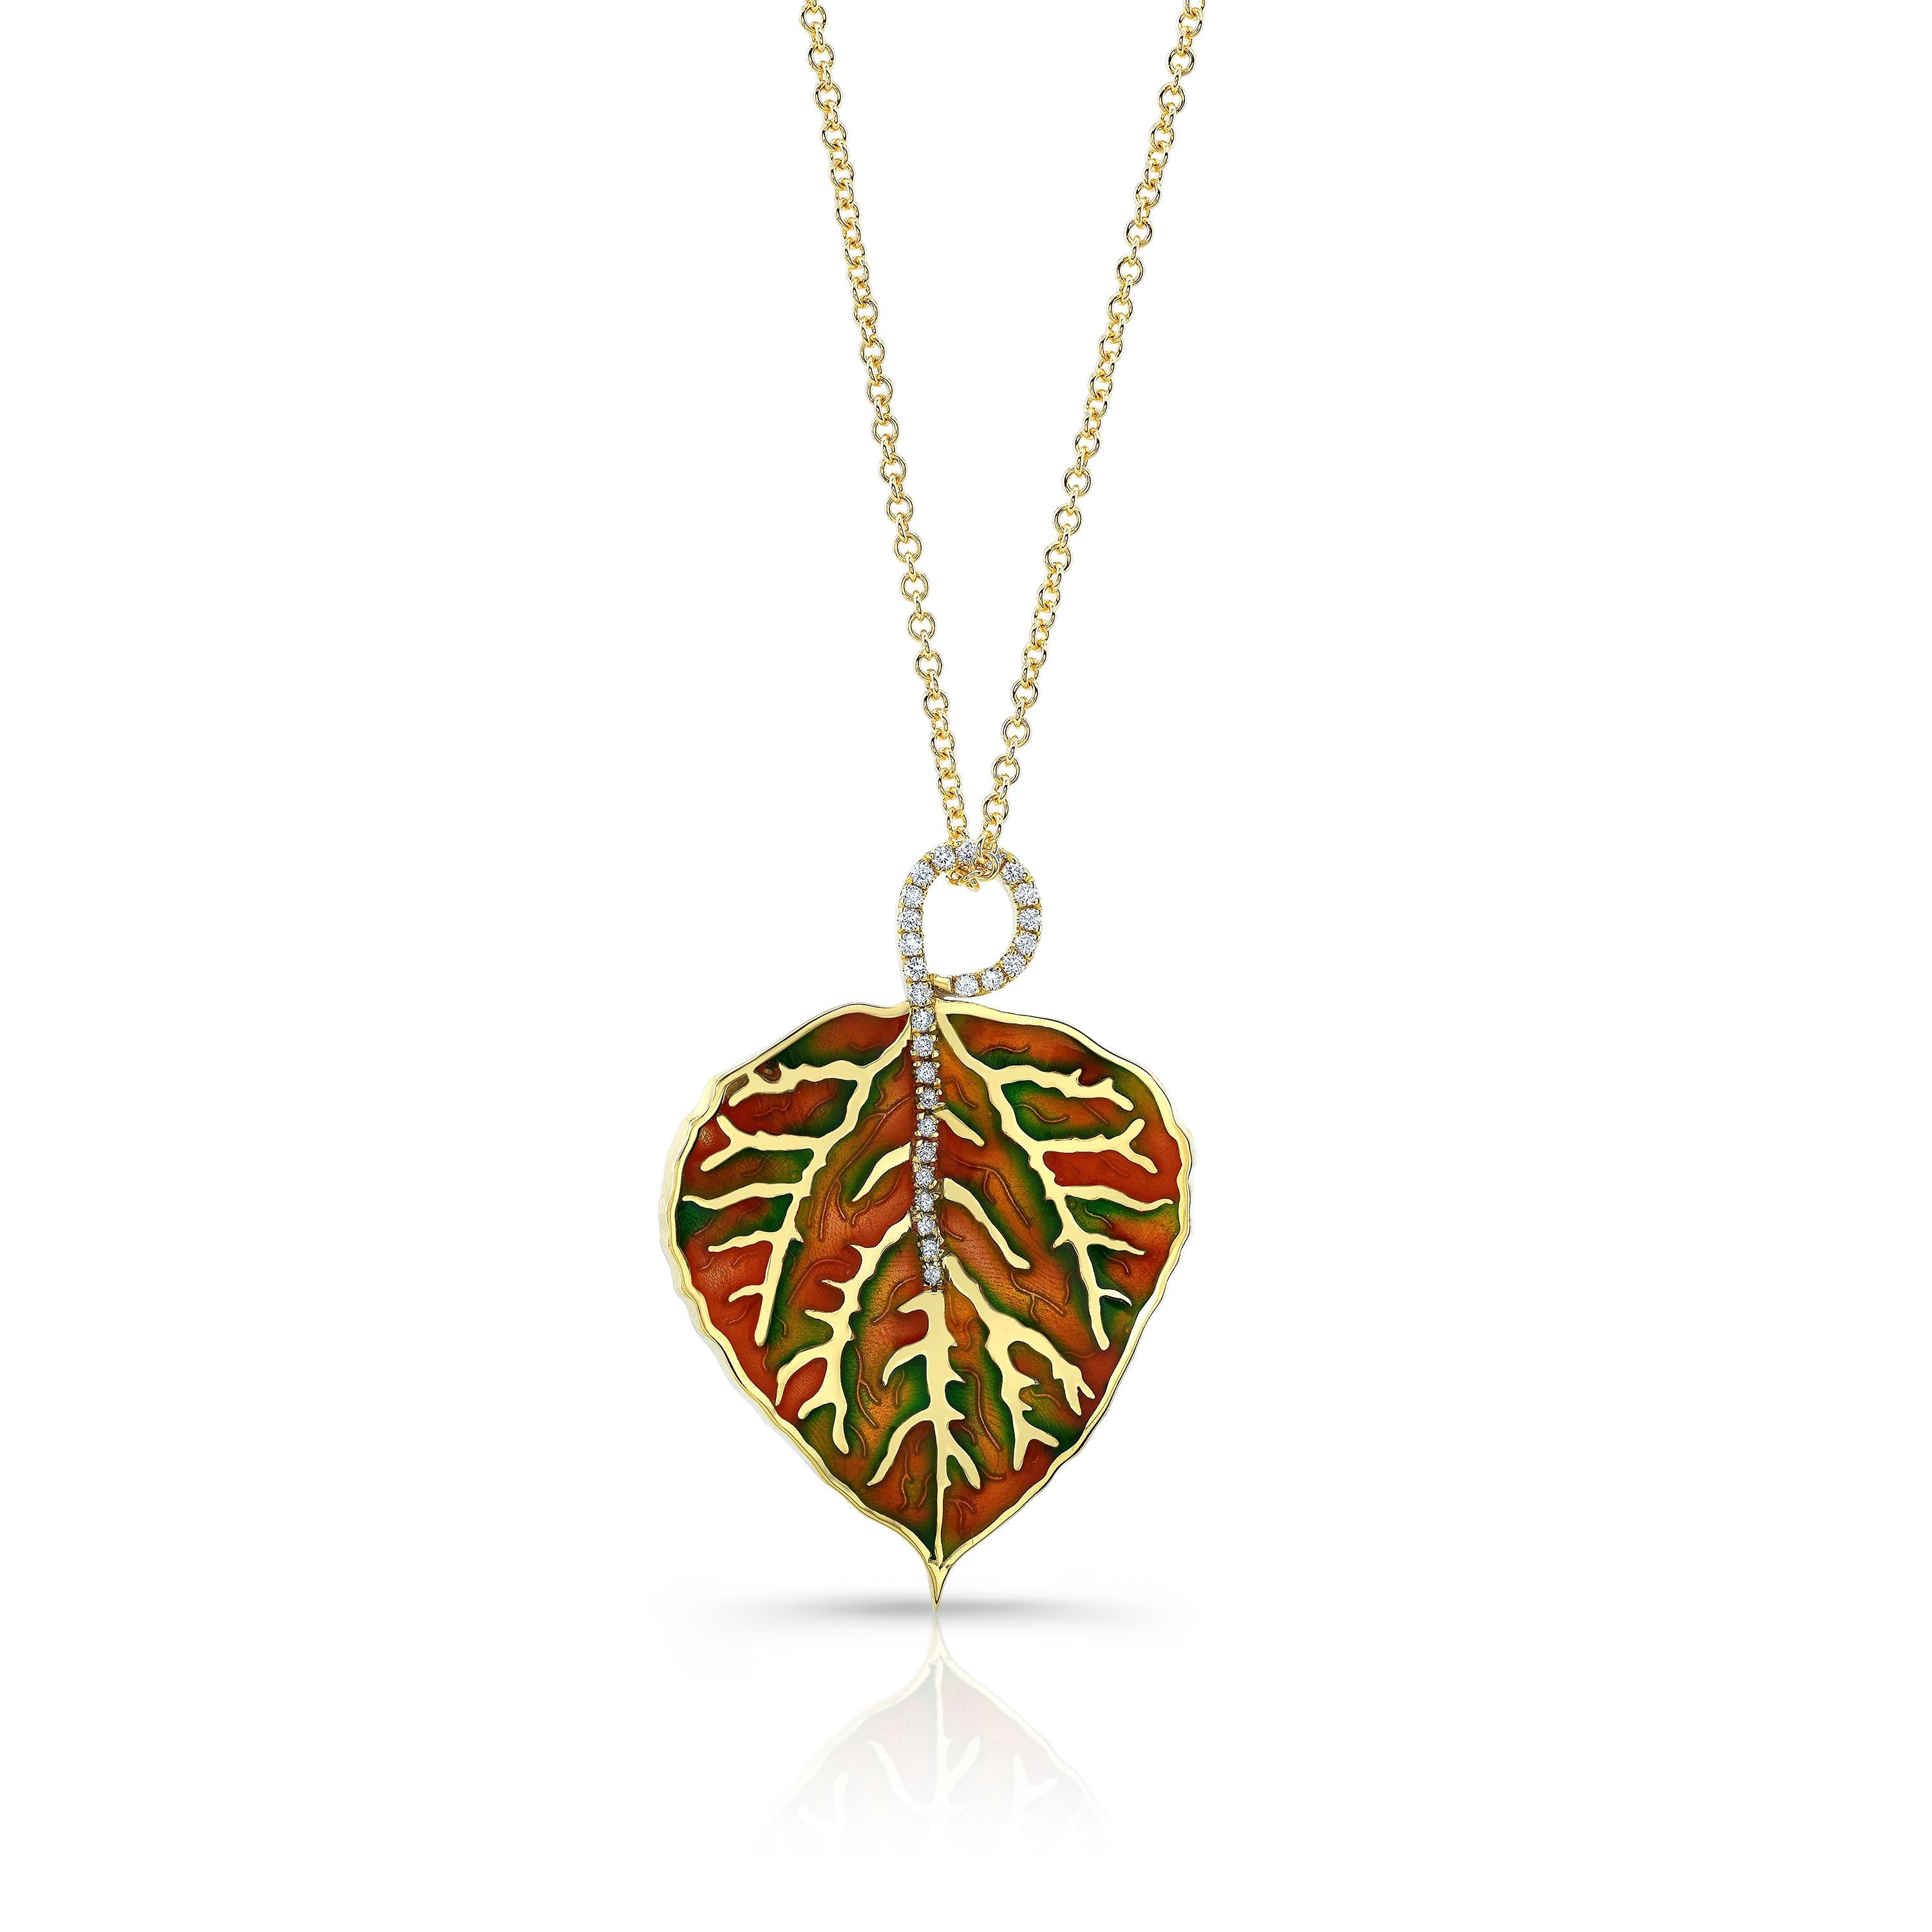 18k gold and diamond leaf necklaces